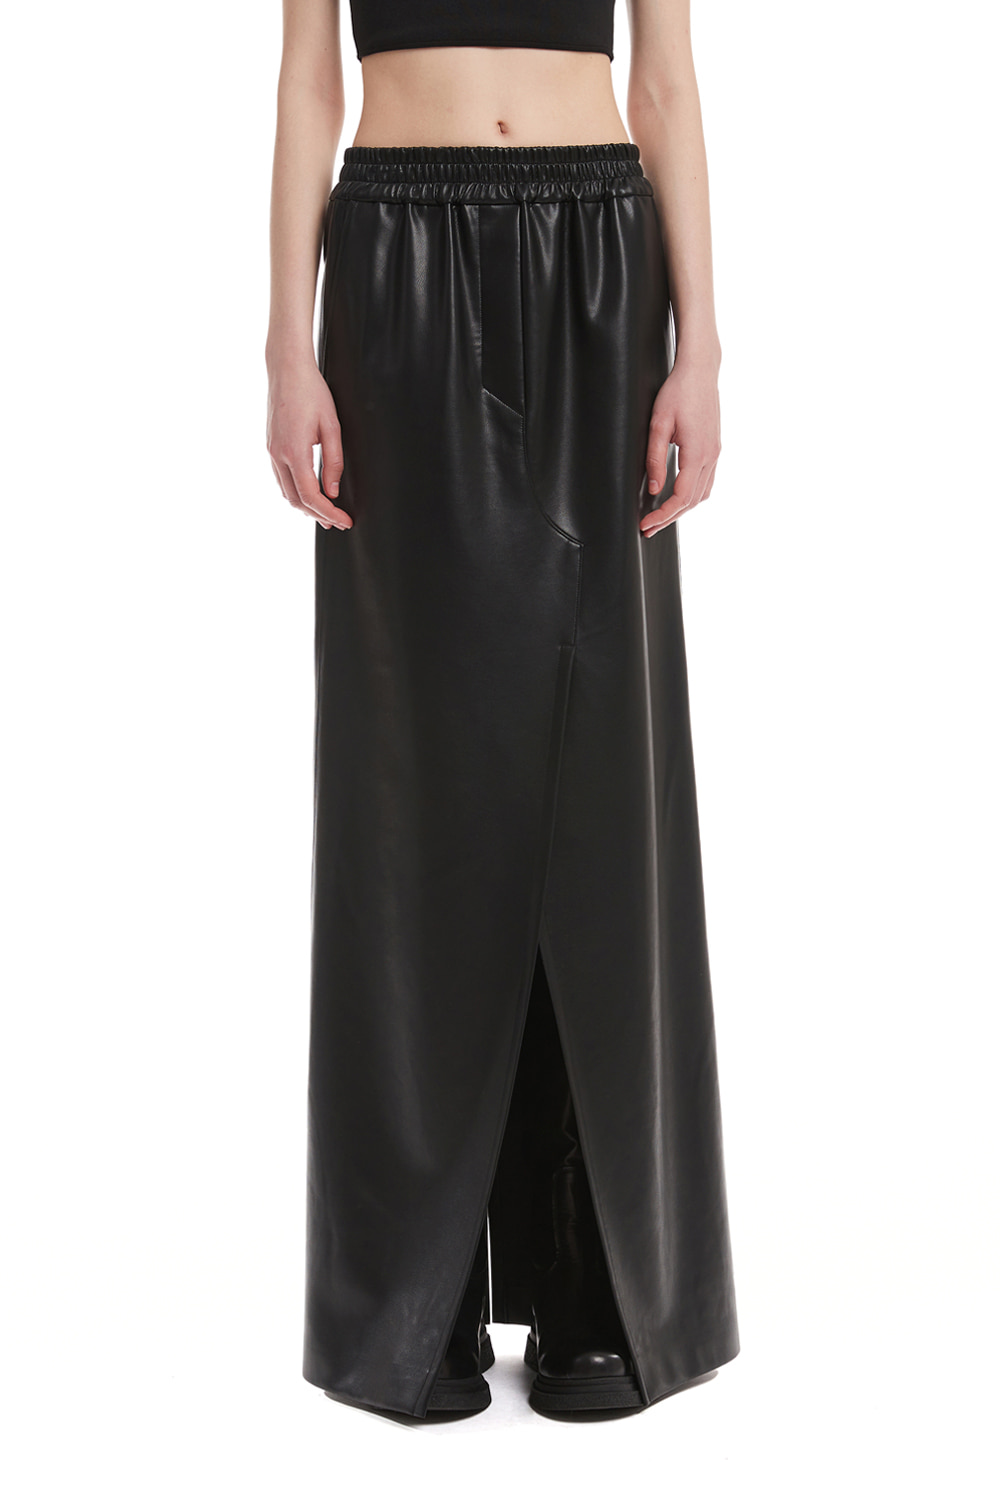 Black Faux-Leather Long Skirt